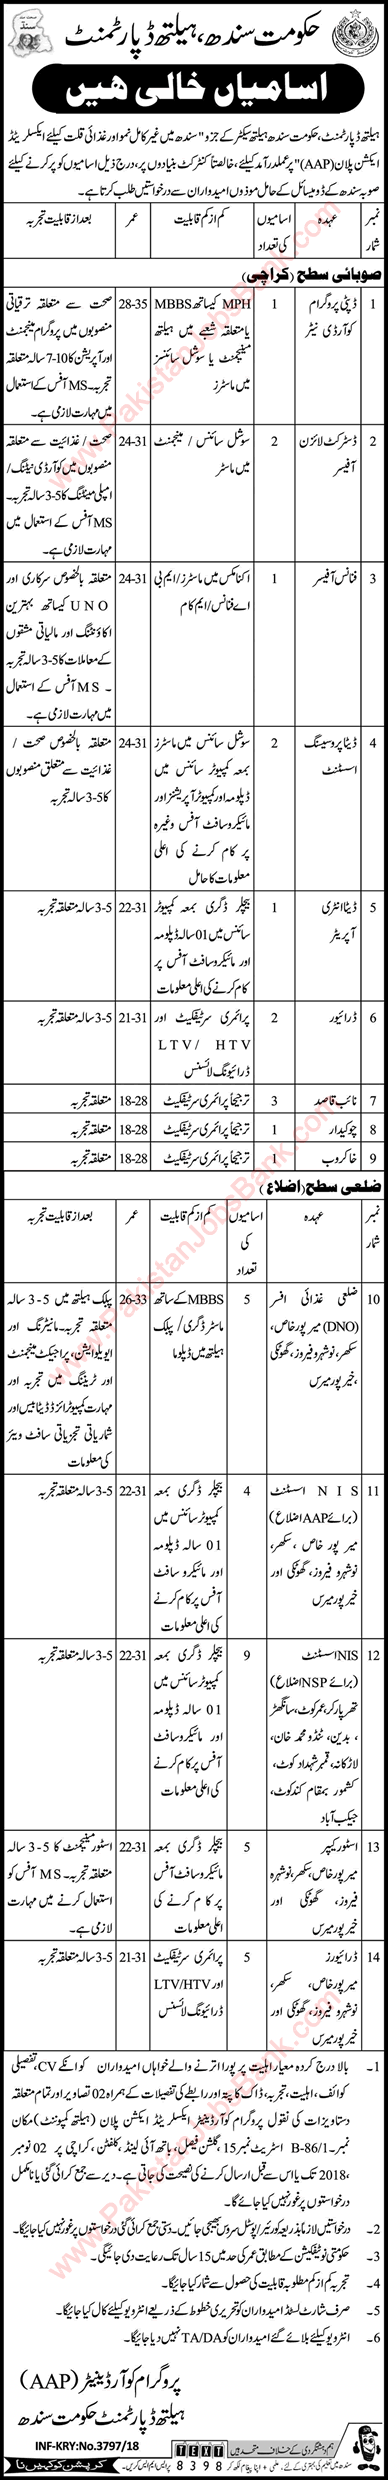 Health Department Sindh Jobs October 2018 AAP NIS Assistants, Store Keepers & Others Latest